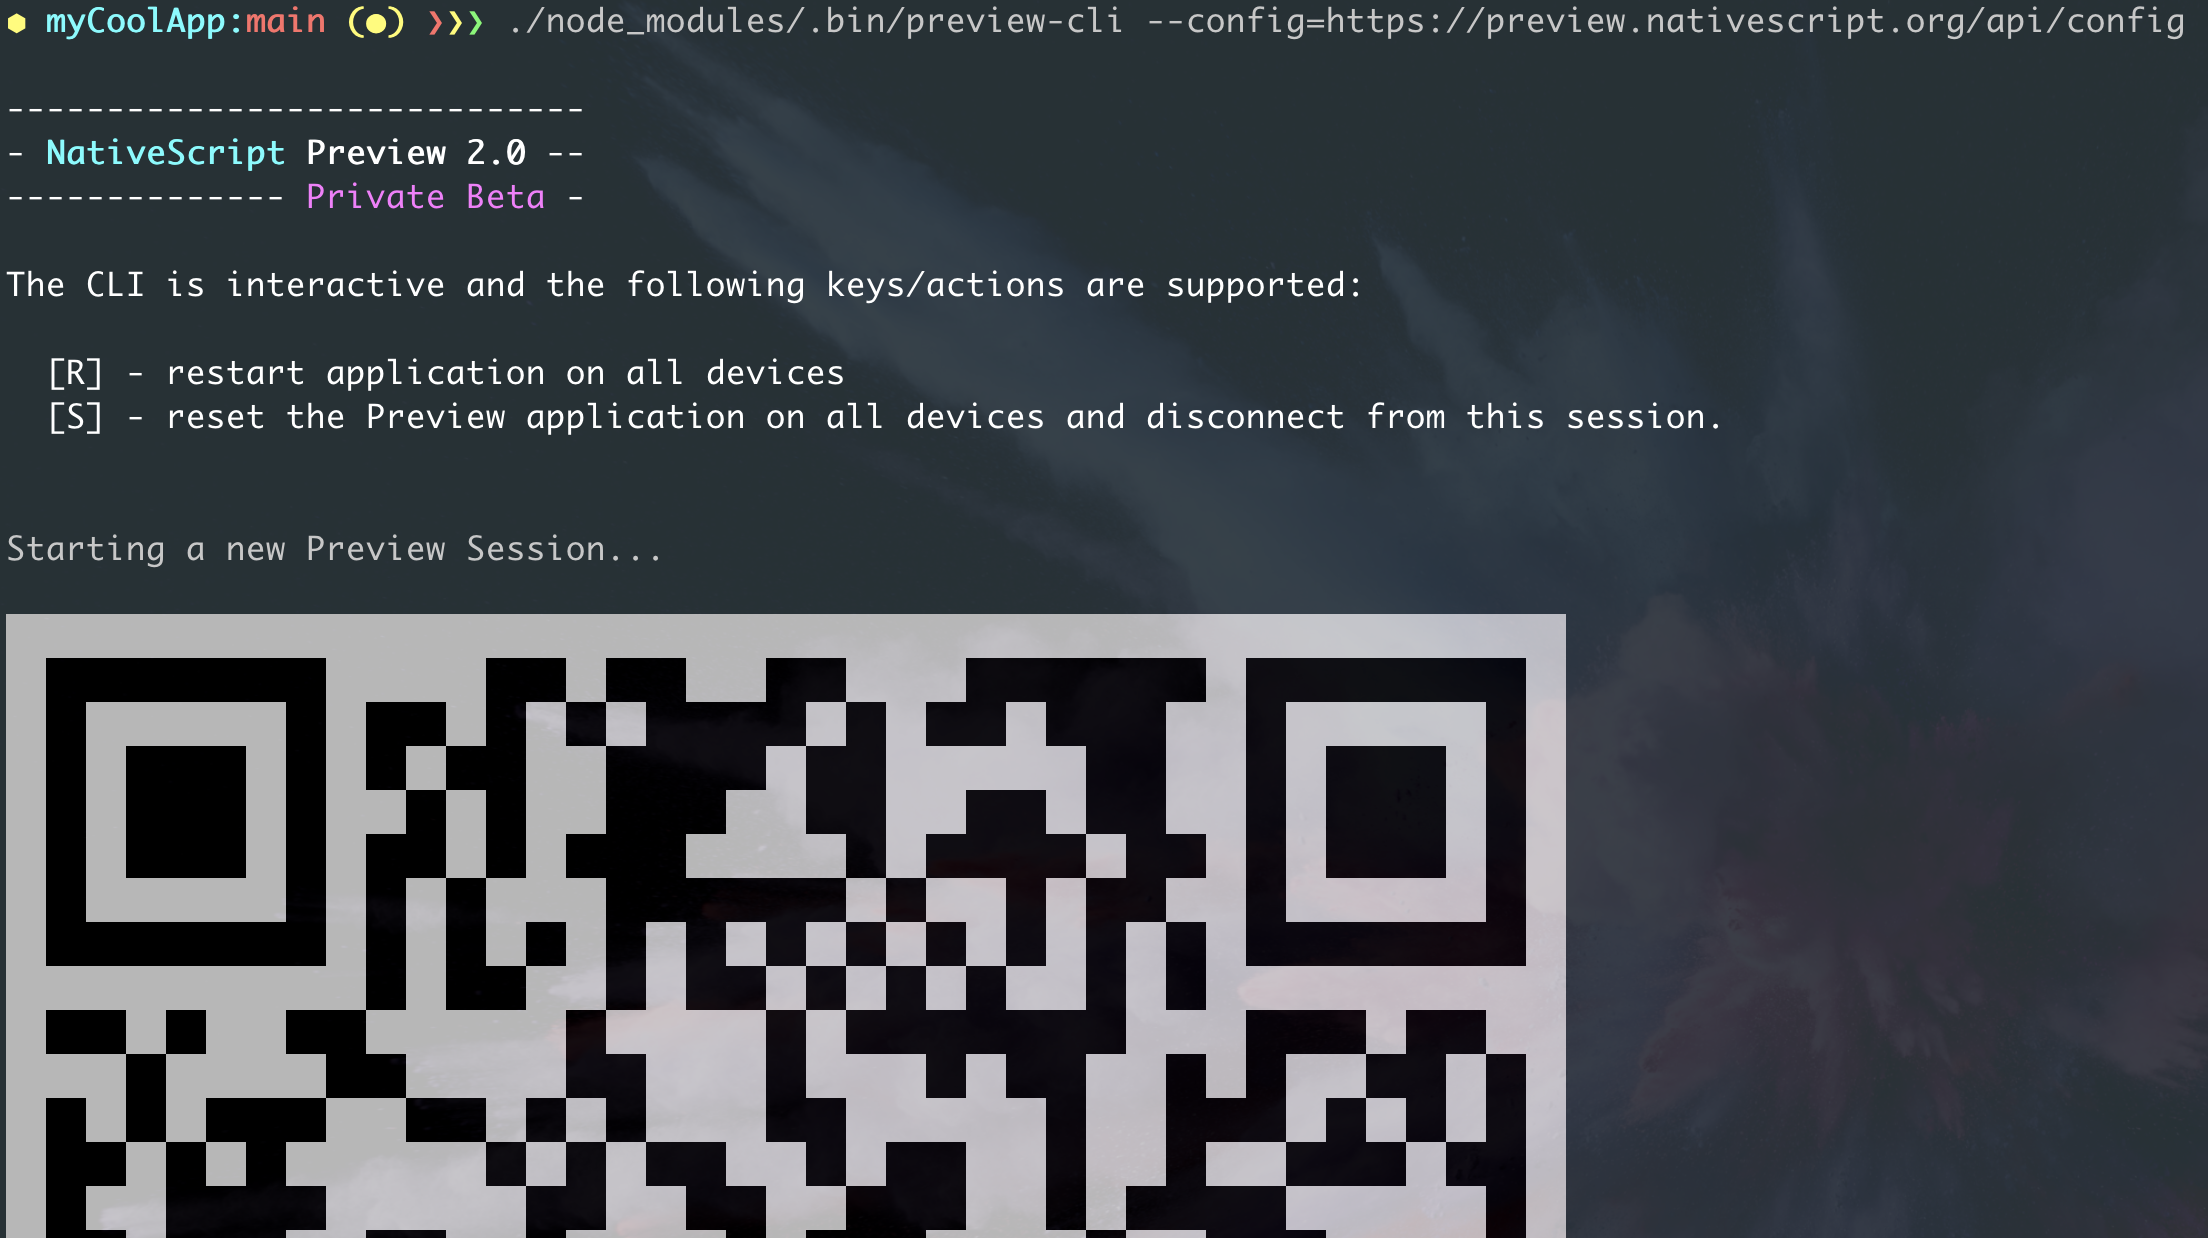 Preview CLI printing a QR code